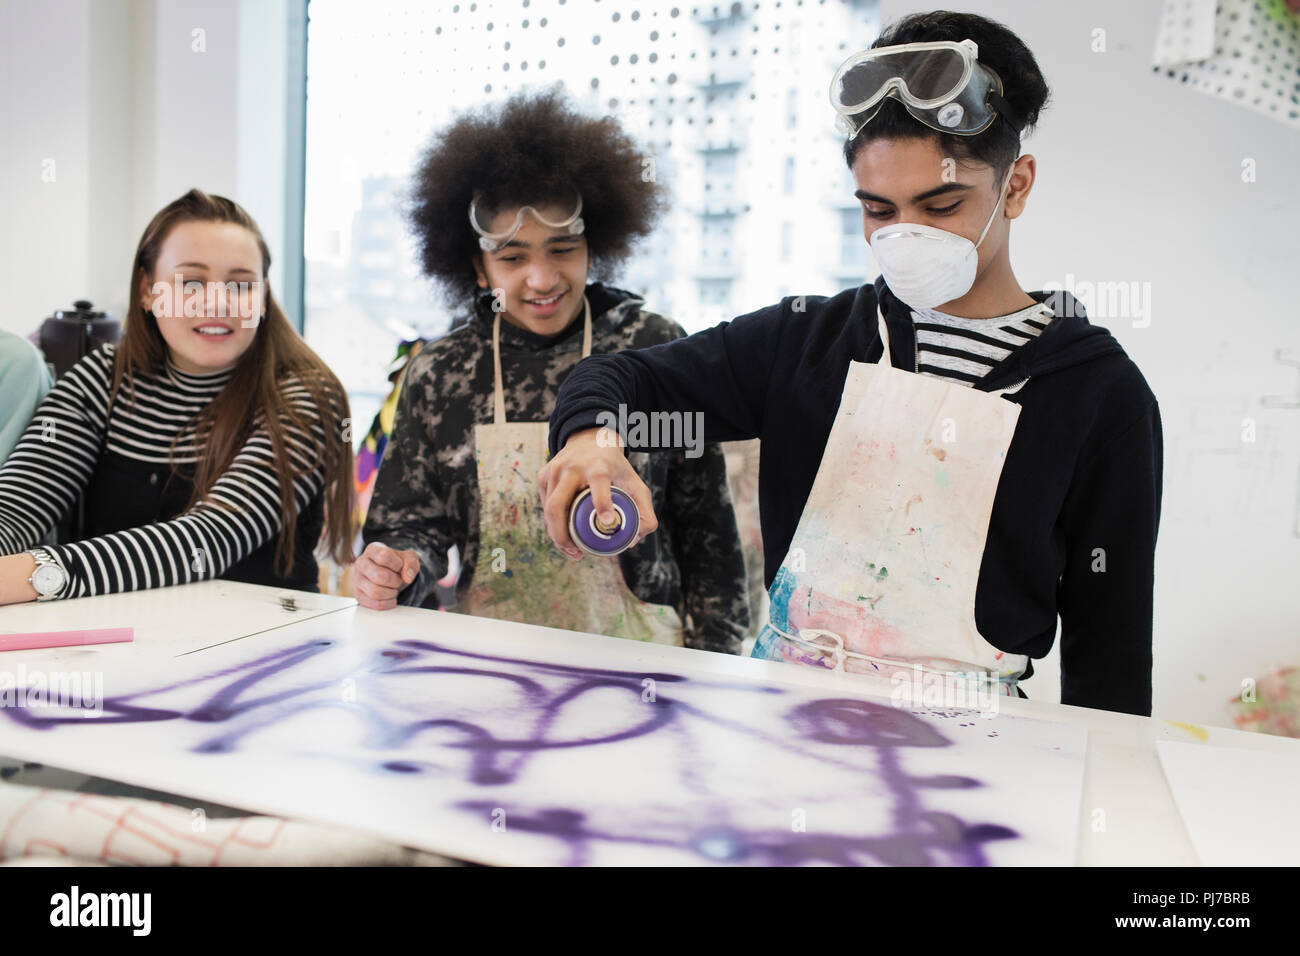 Teenagers spray painting in art class Stock Photo